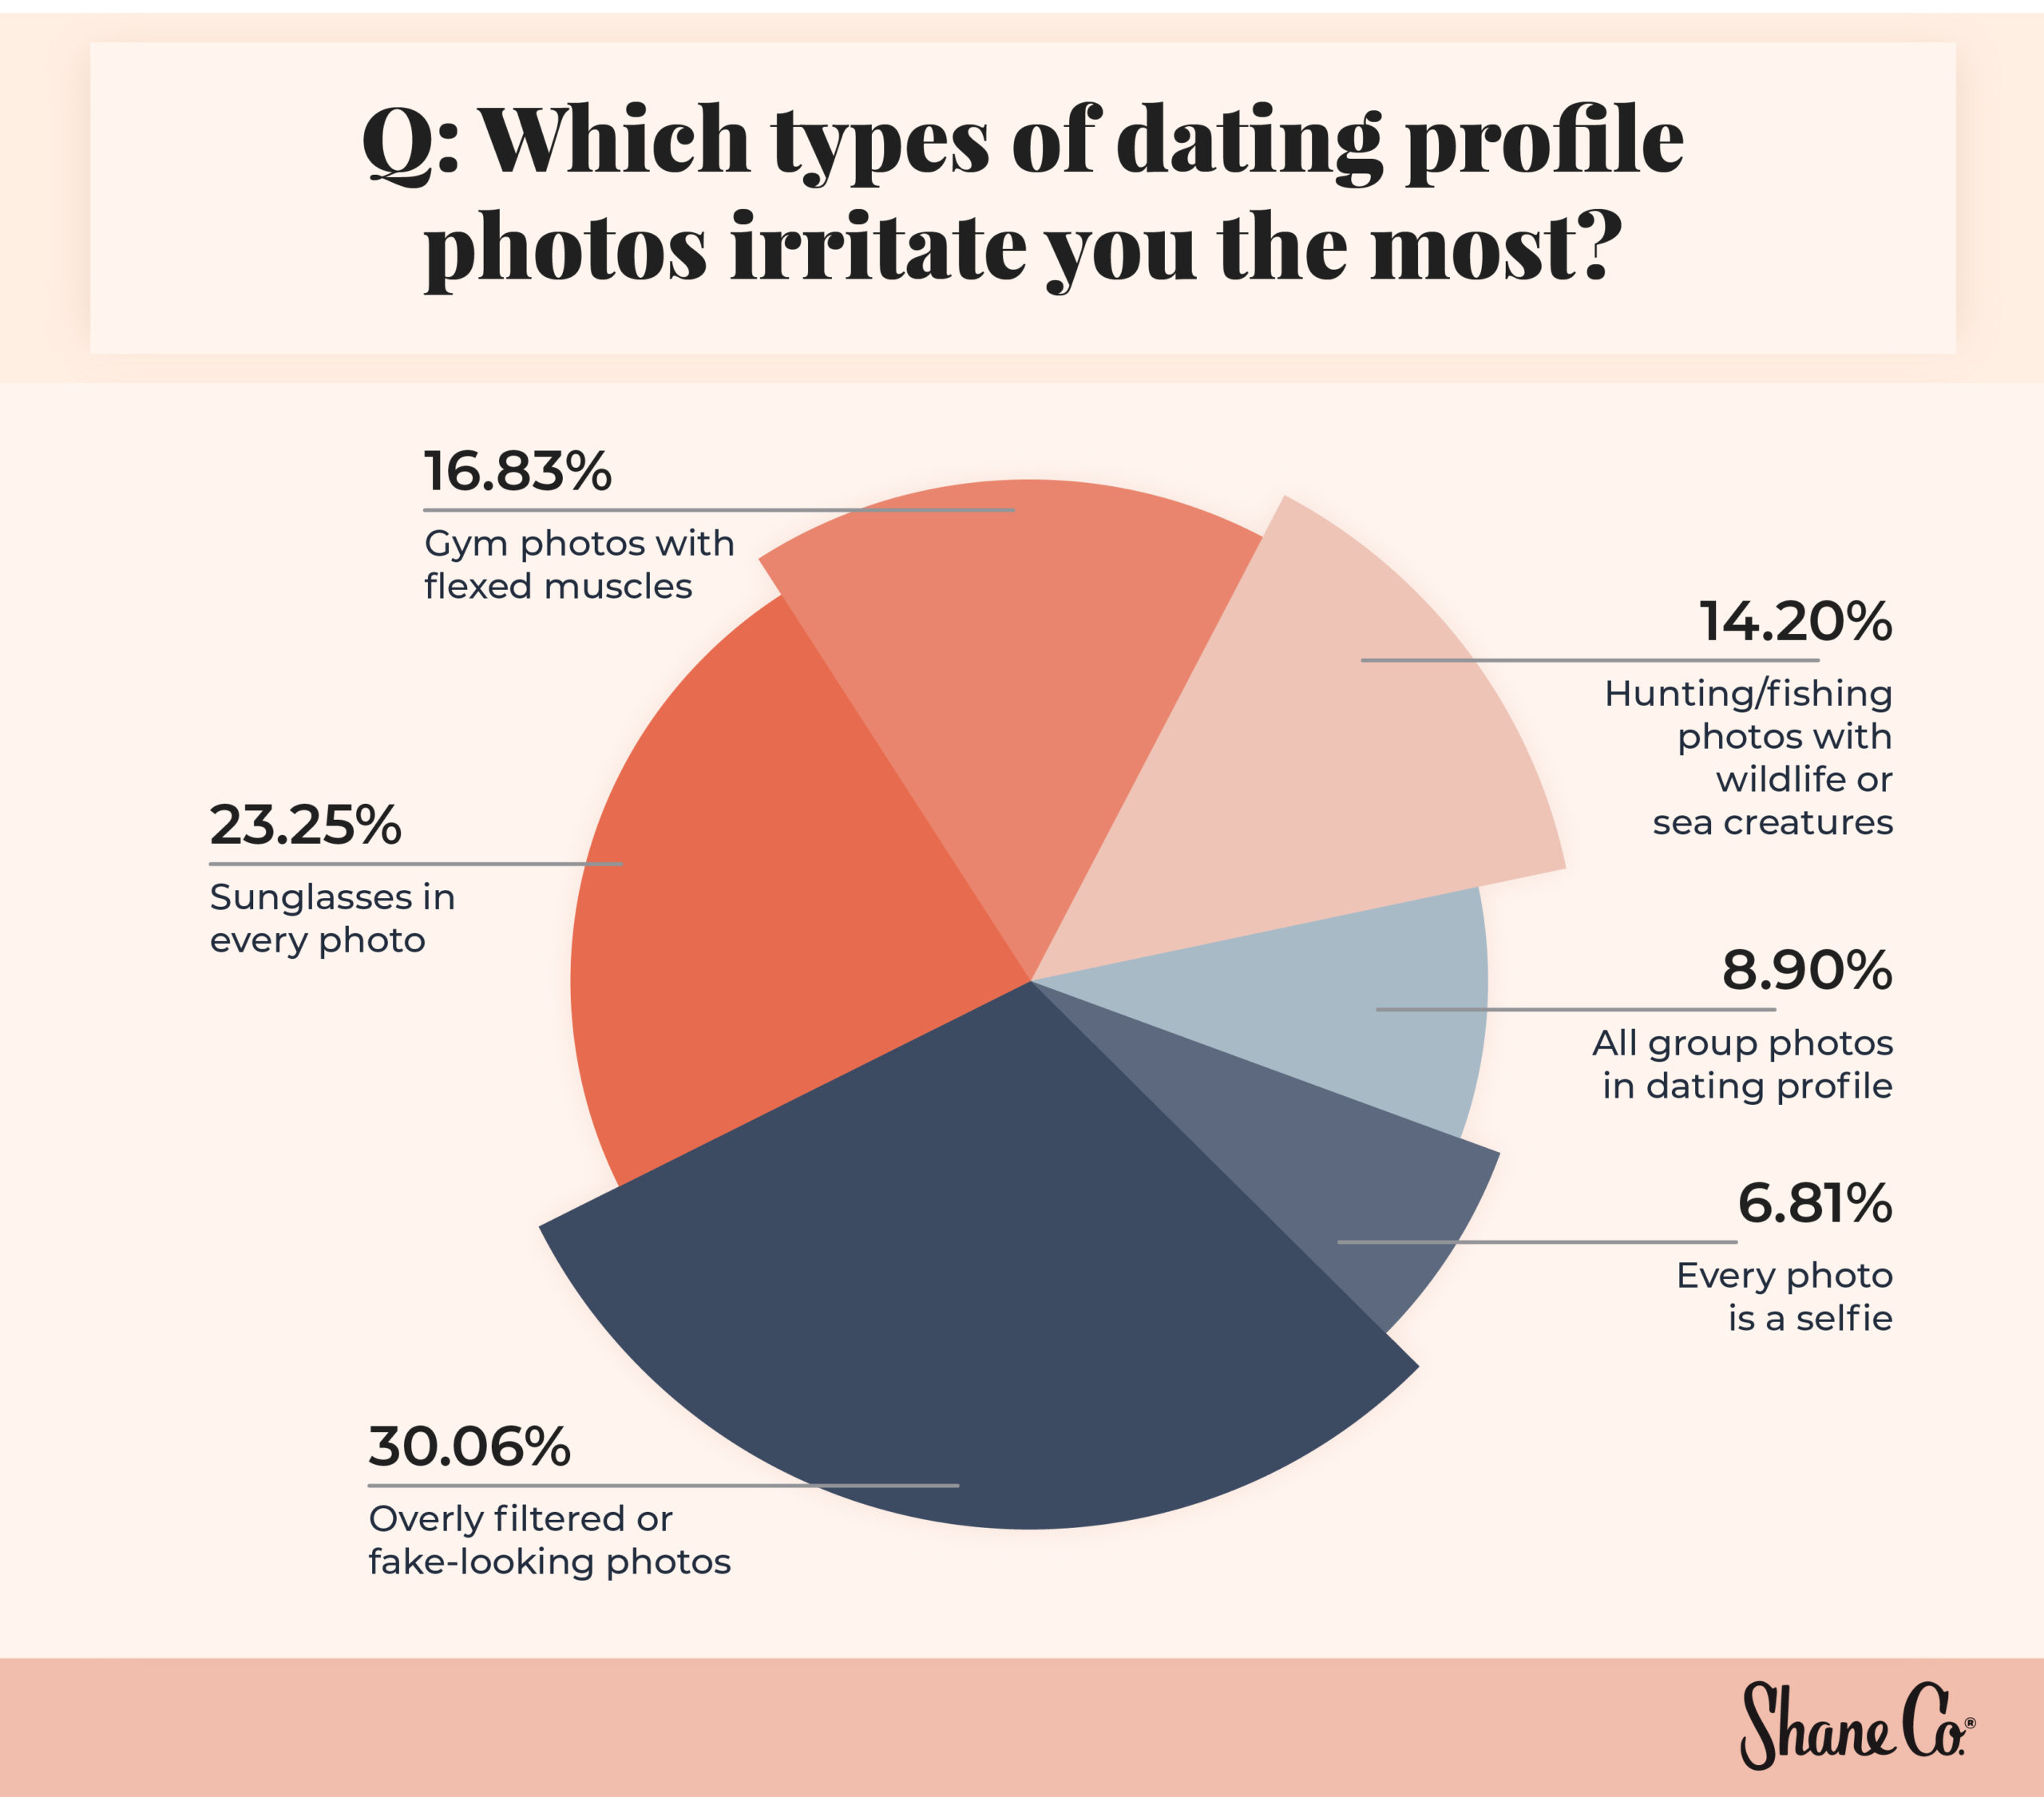 Pie chart showing which types of dating profile photos irritate someone the most.